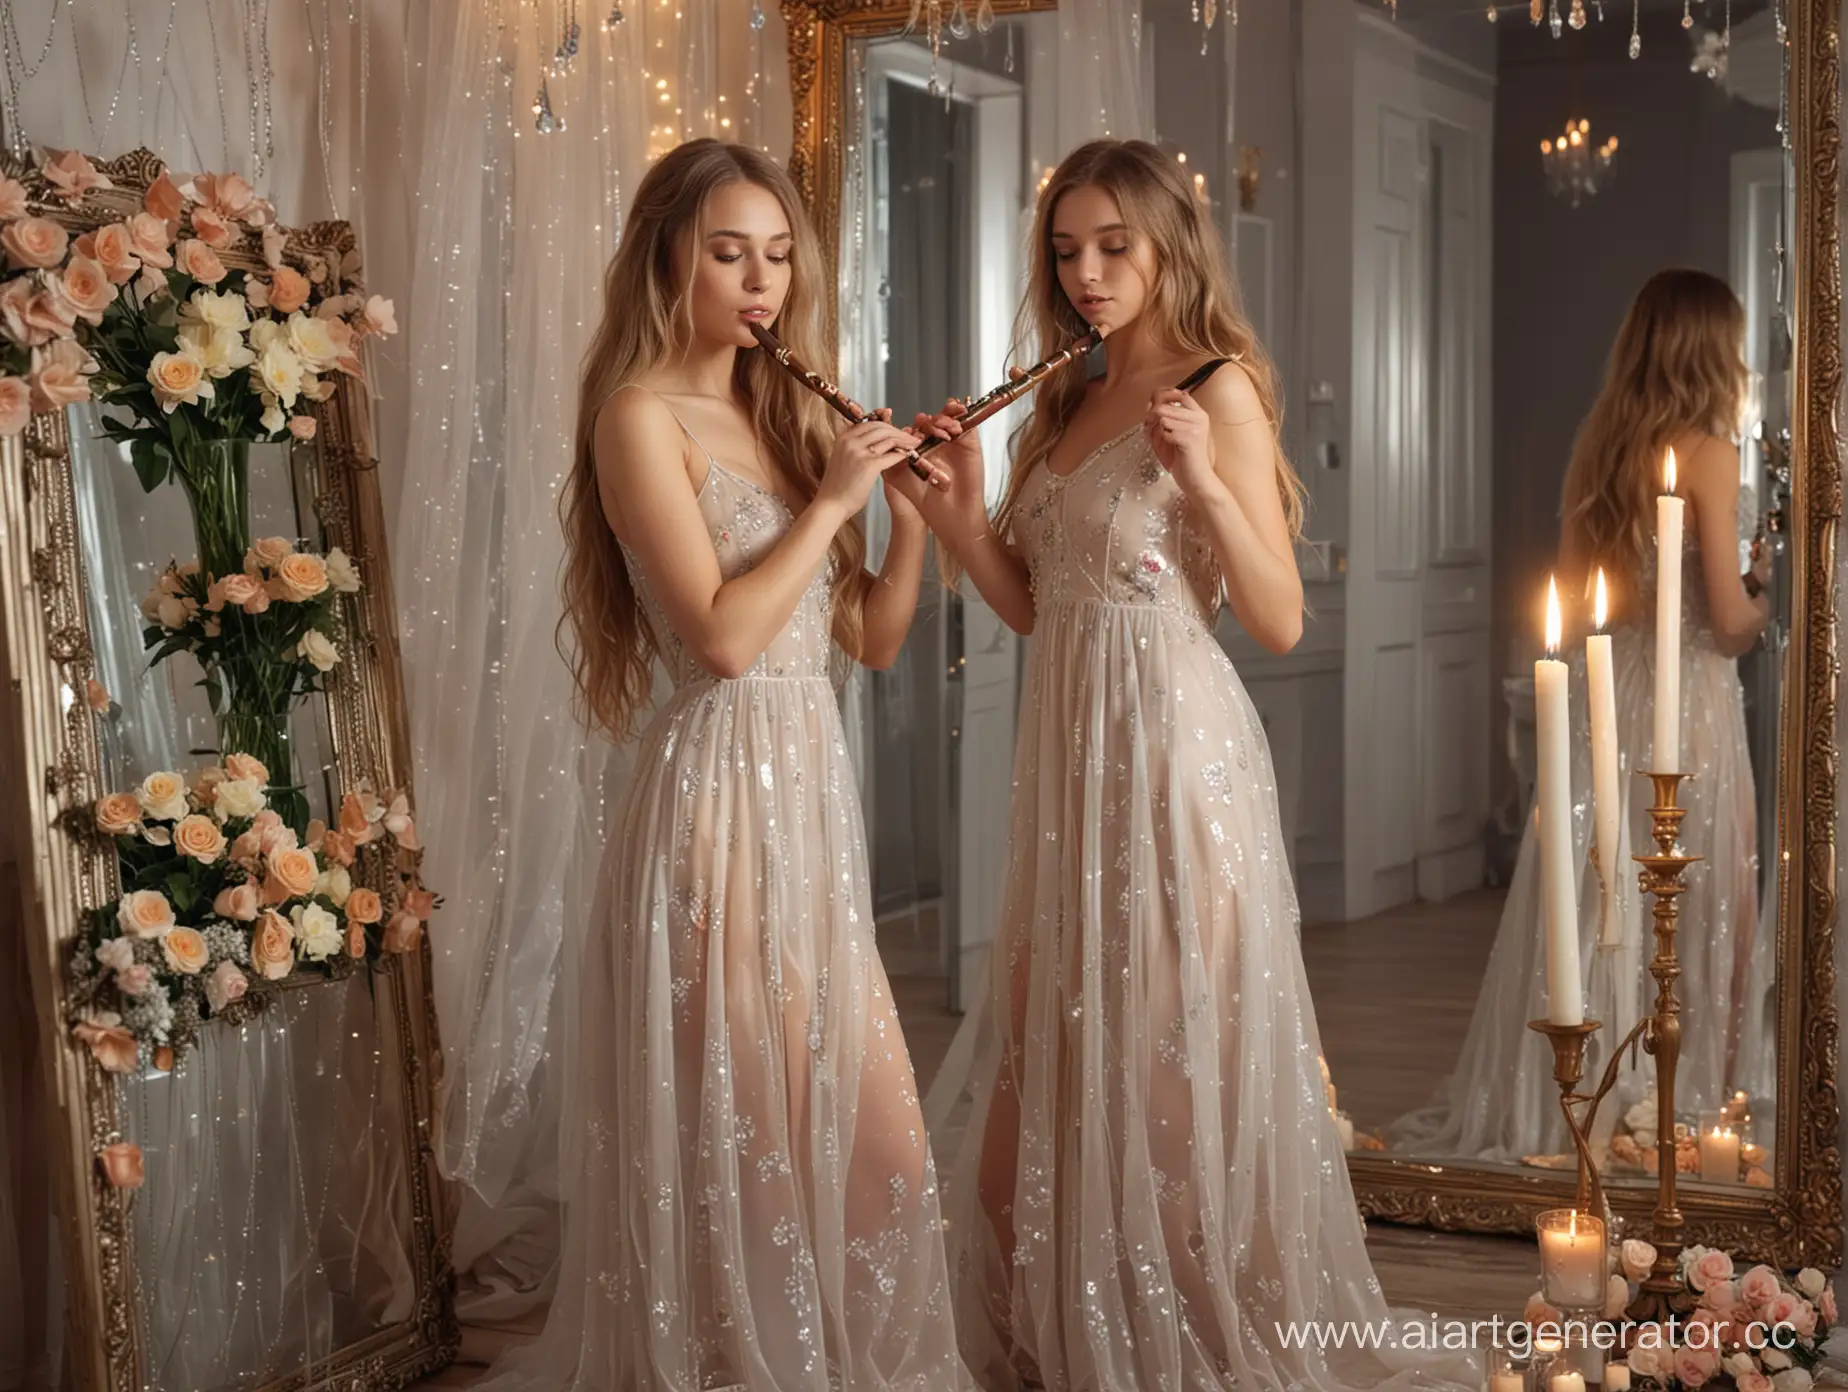 Sensual-Russian-Flute-Player-in-Floral-Chamber-with-Mirrors-and-Candles